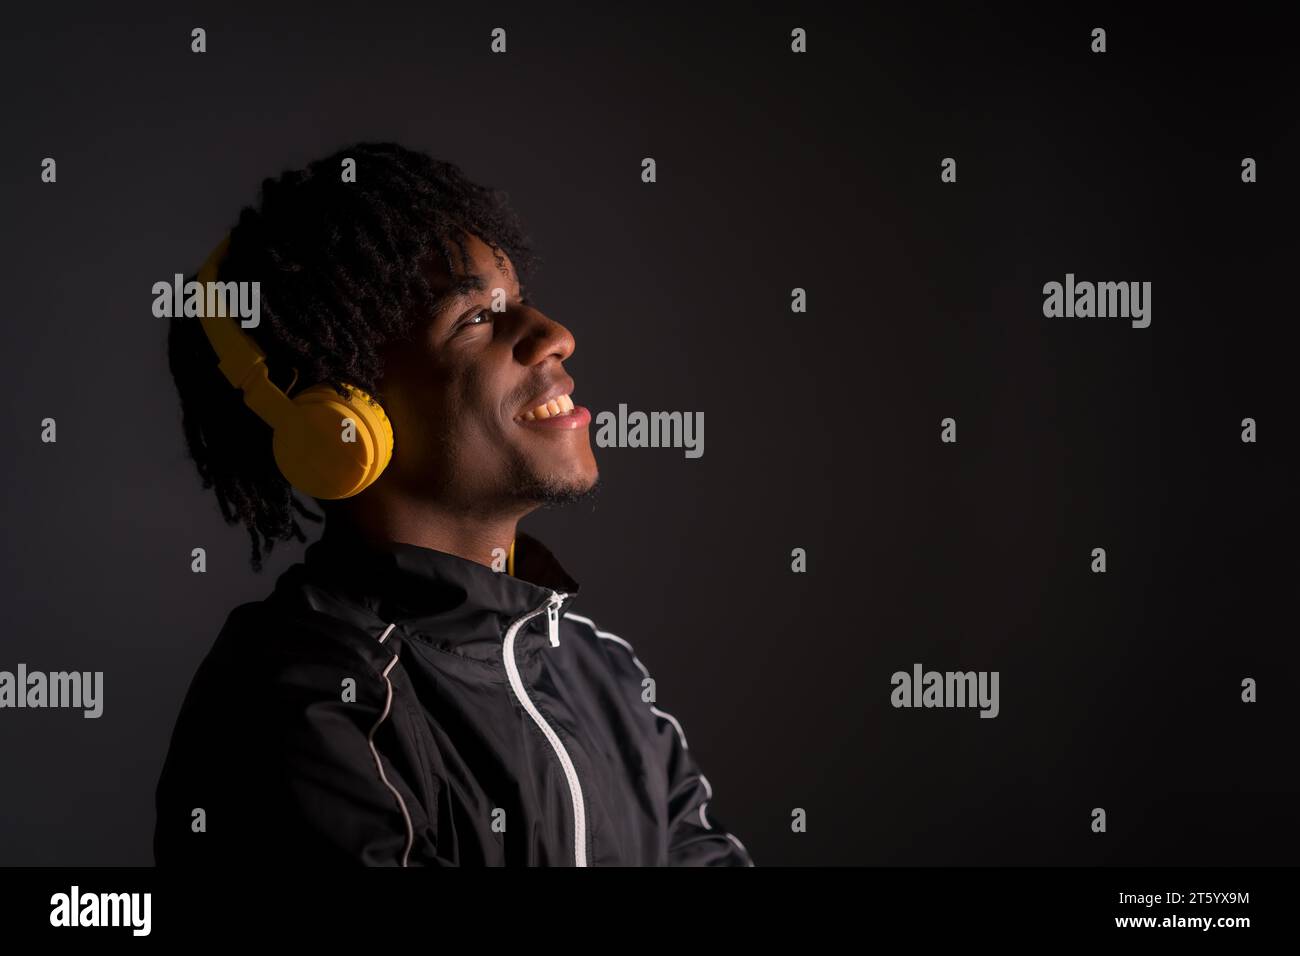 Dark studio portrait of a young african man listening to music with headphones Stock Photo